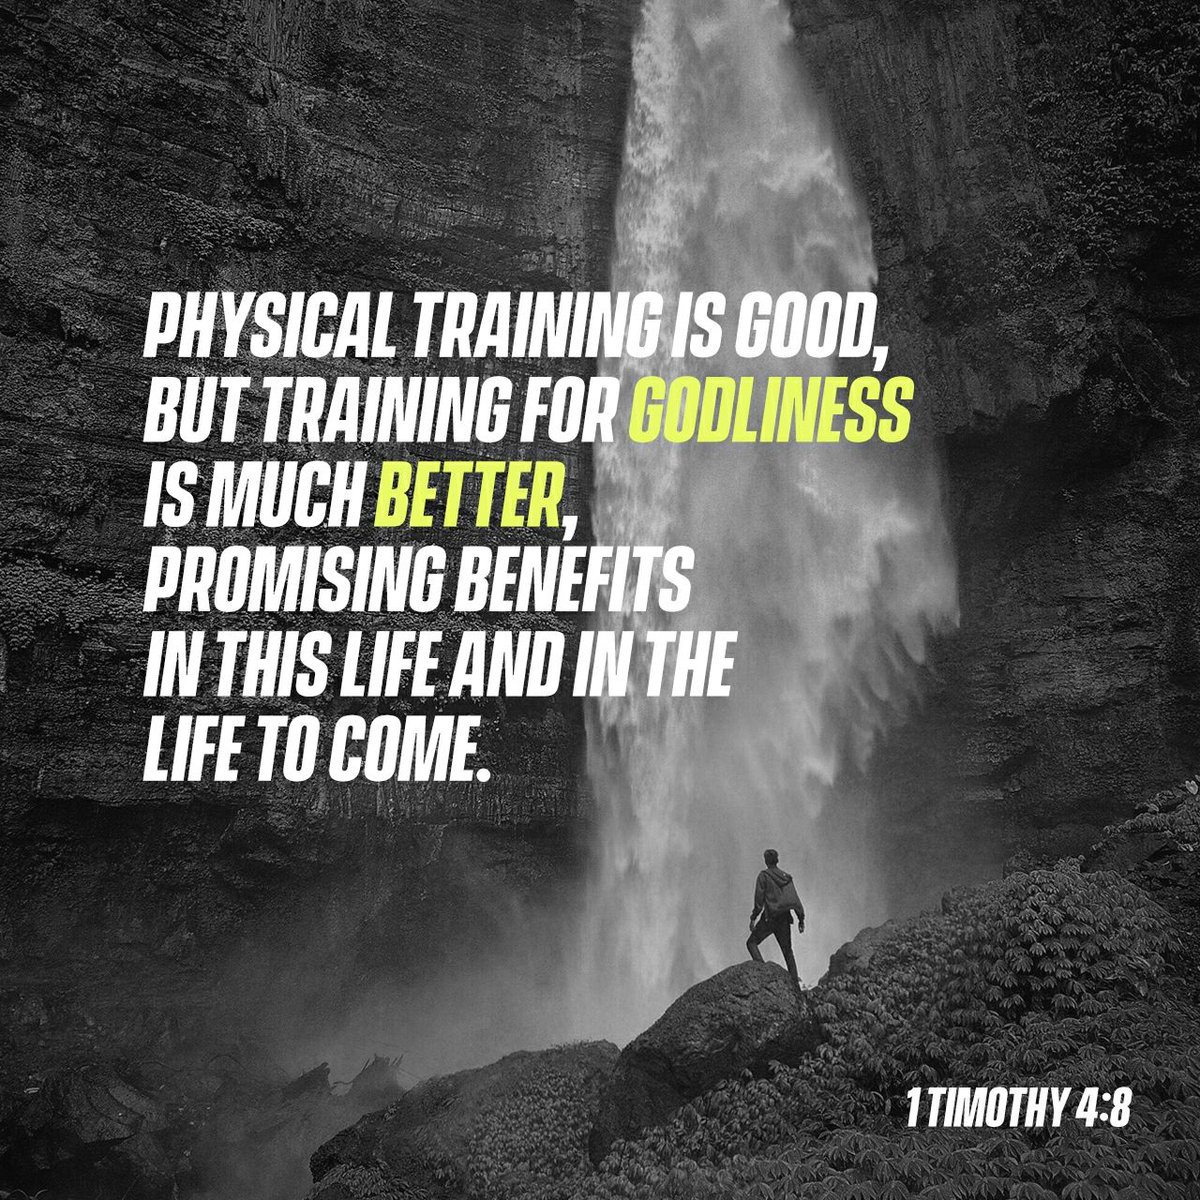 Hump Day Help-8/23:
Physical strength will NEVER be stronger than godly strength. #GetGodStrong. #1Tim4v8.